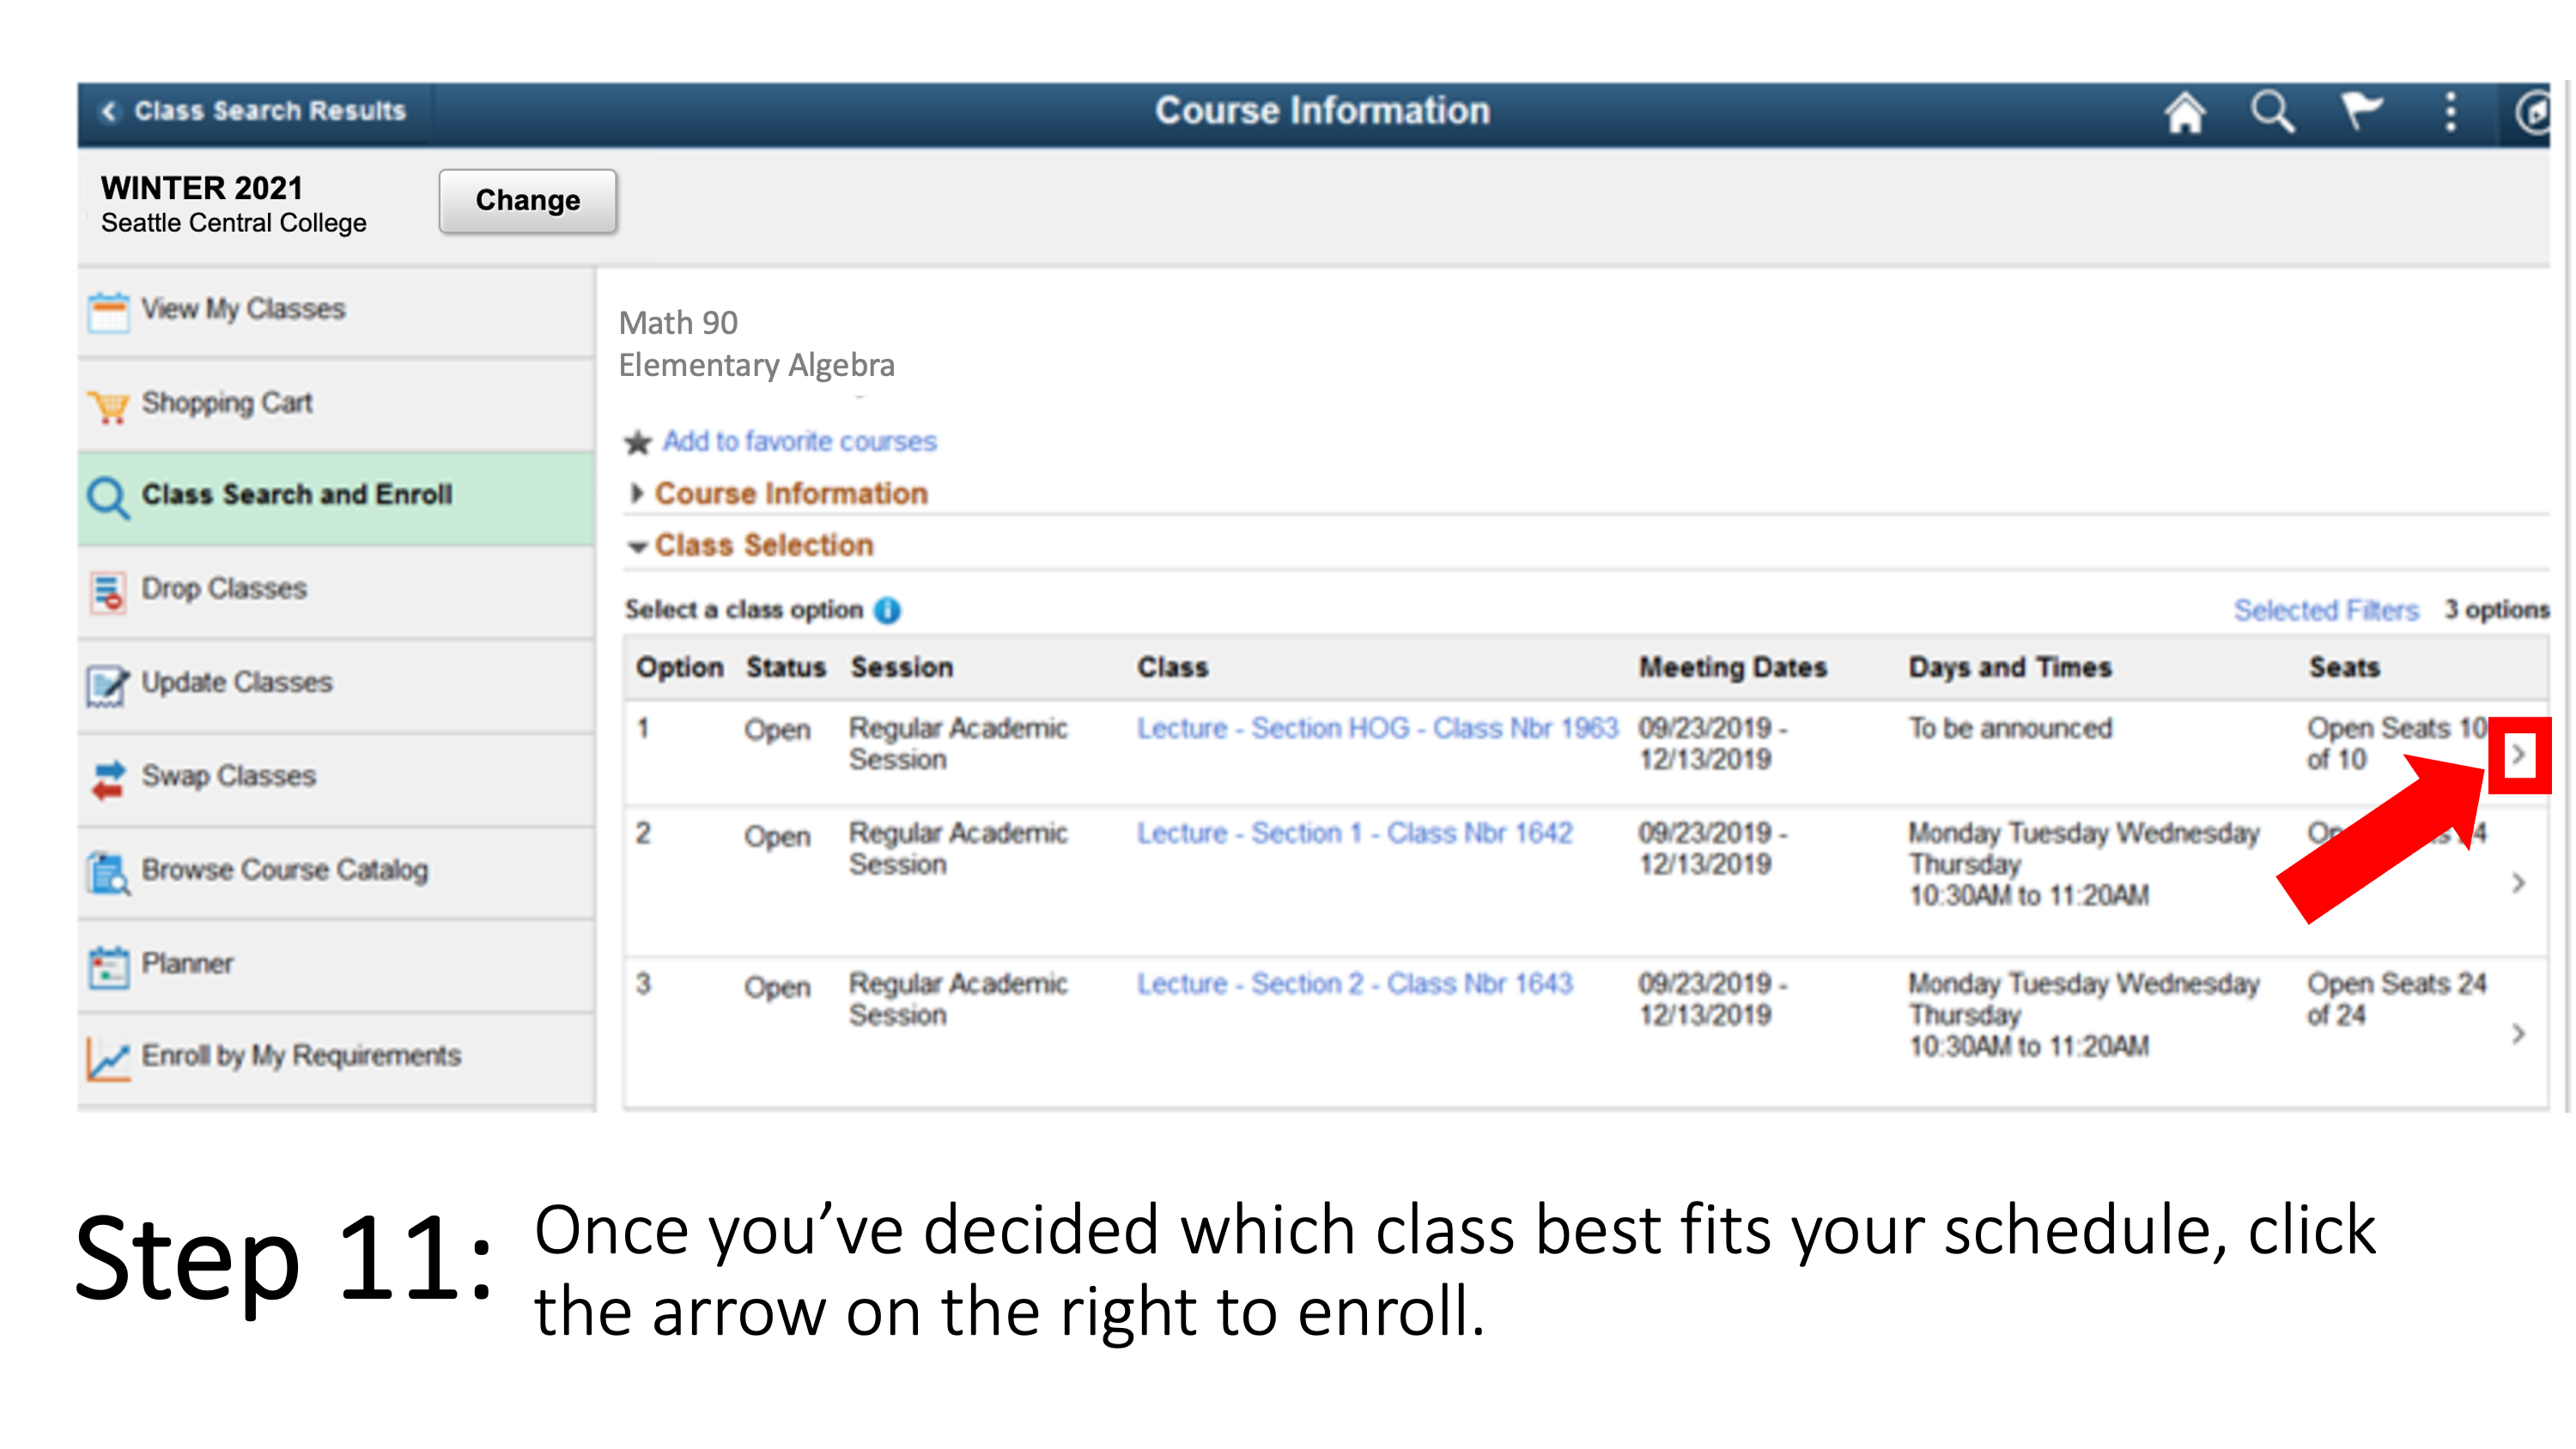 Once you’ve decided which class best fits your schedule, click the arrow on the right to enroll.